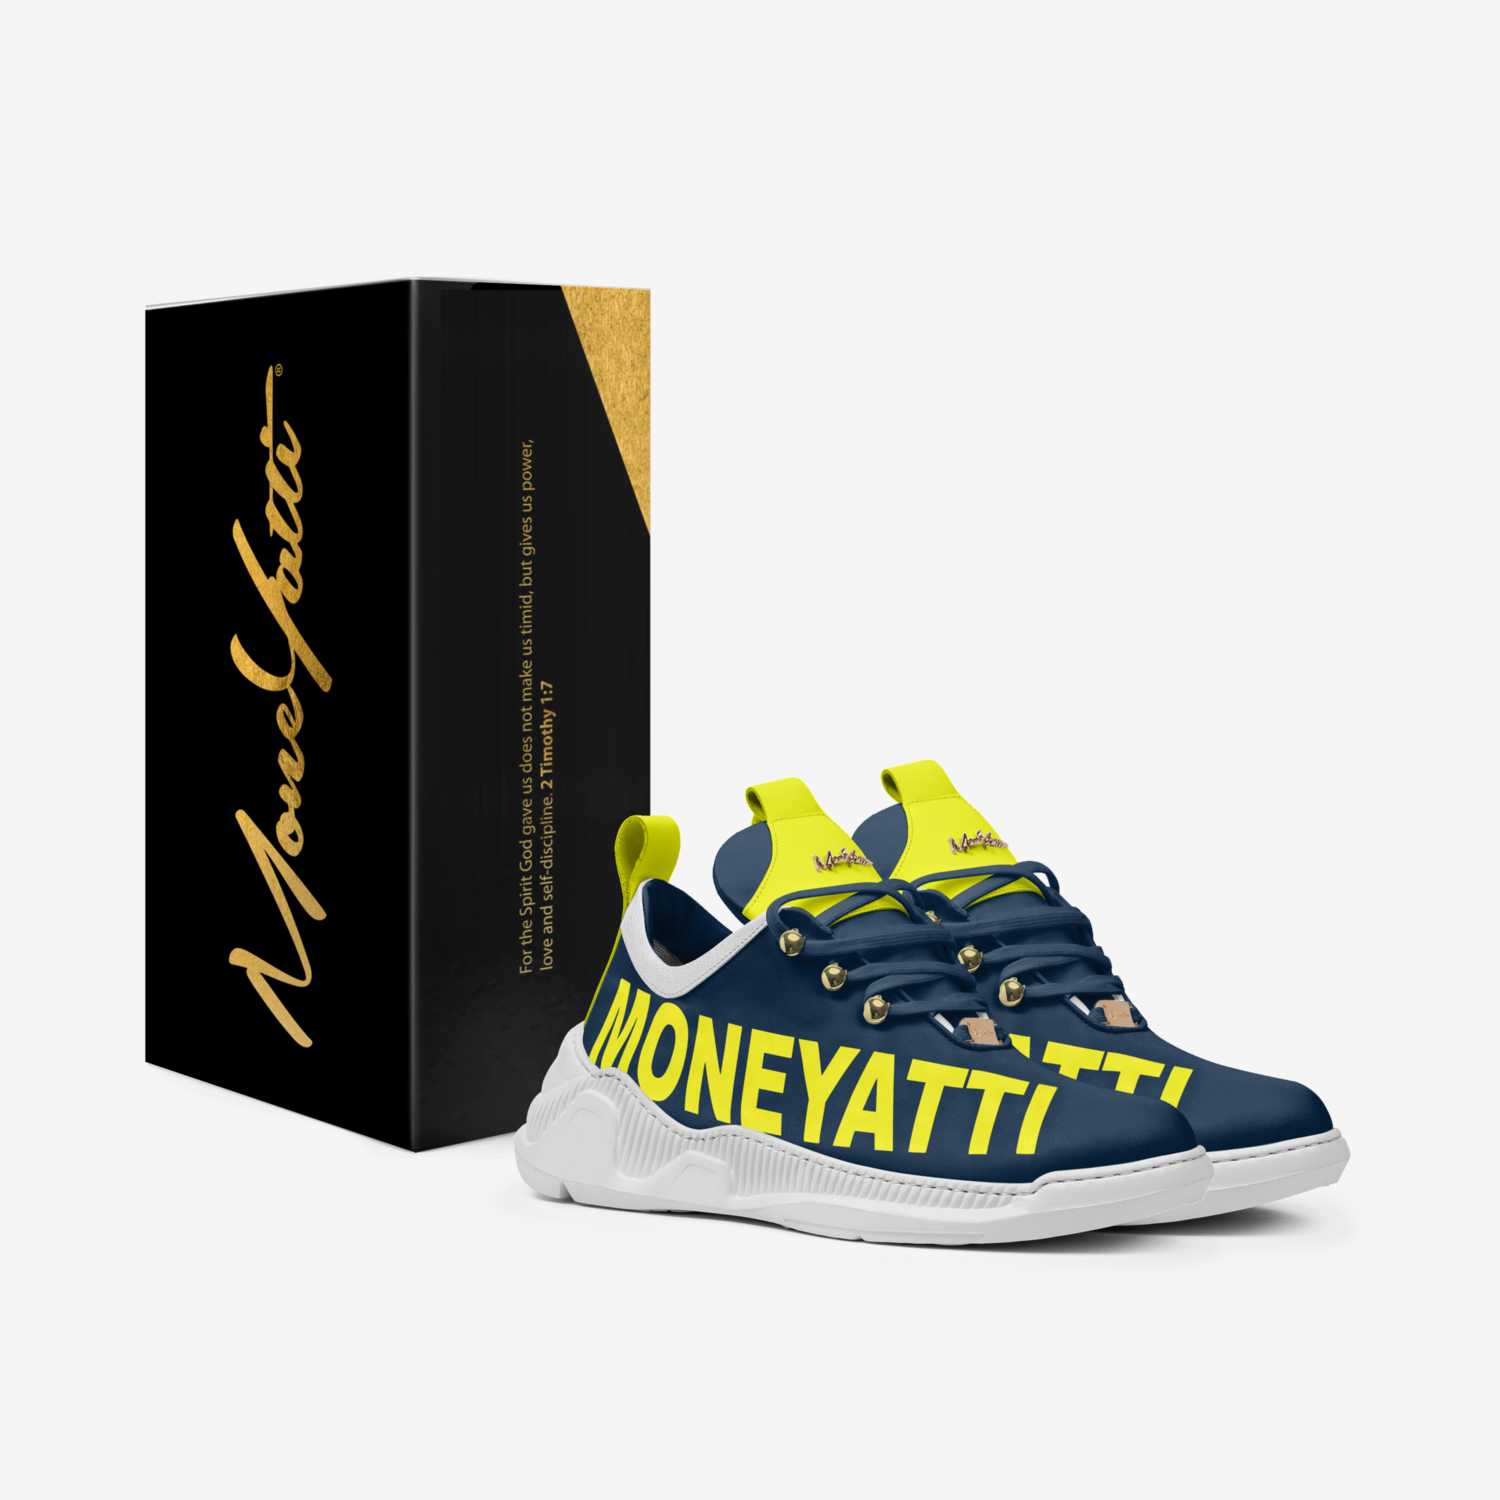 Sig26 custom made in Italy shoes by Moneyatti Brand | Box view